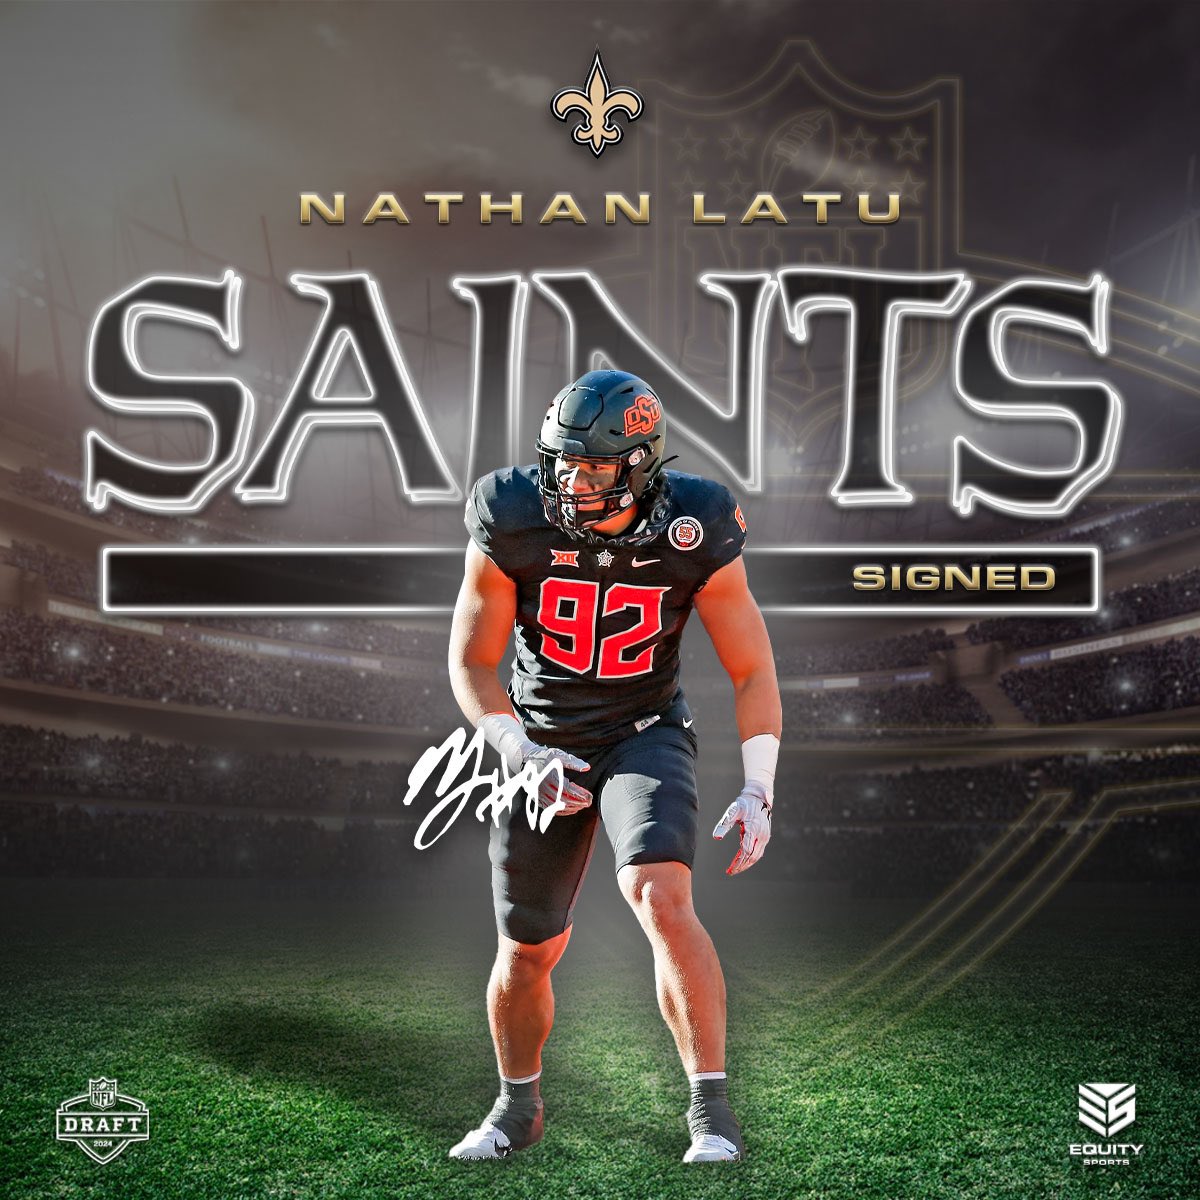 Congratulations @LatuNathan 🔥 Your newest New Orleans Saint!